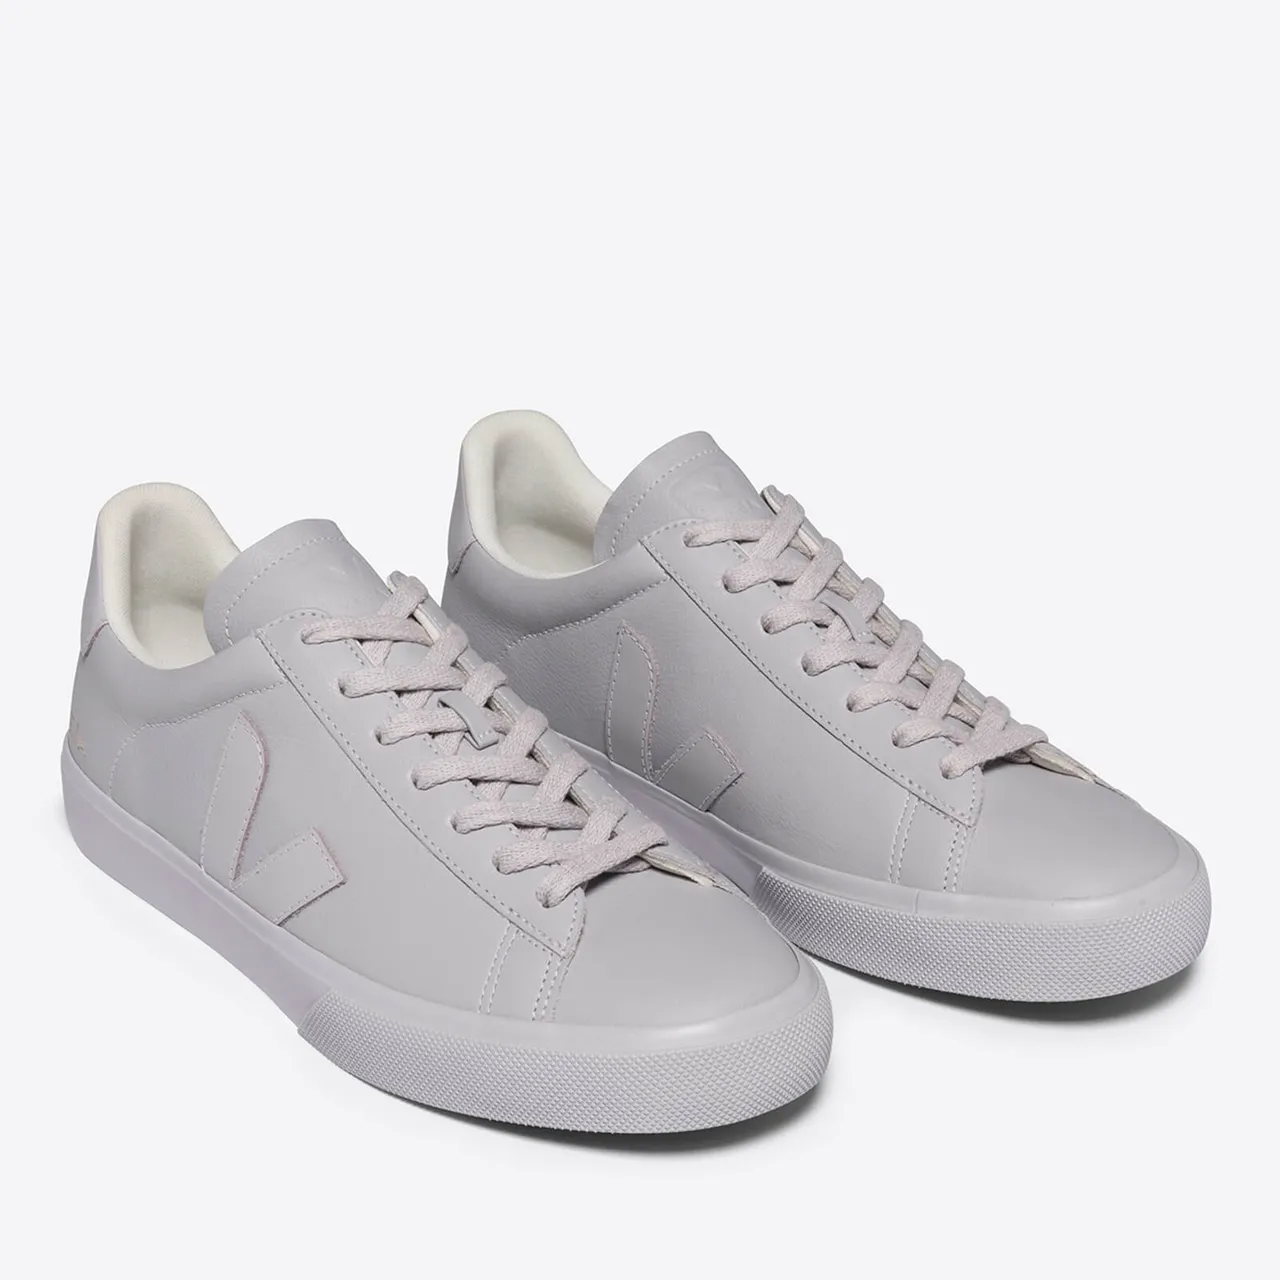 Veja Women's Campo Chrome-Free Leather Trainers - UK